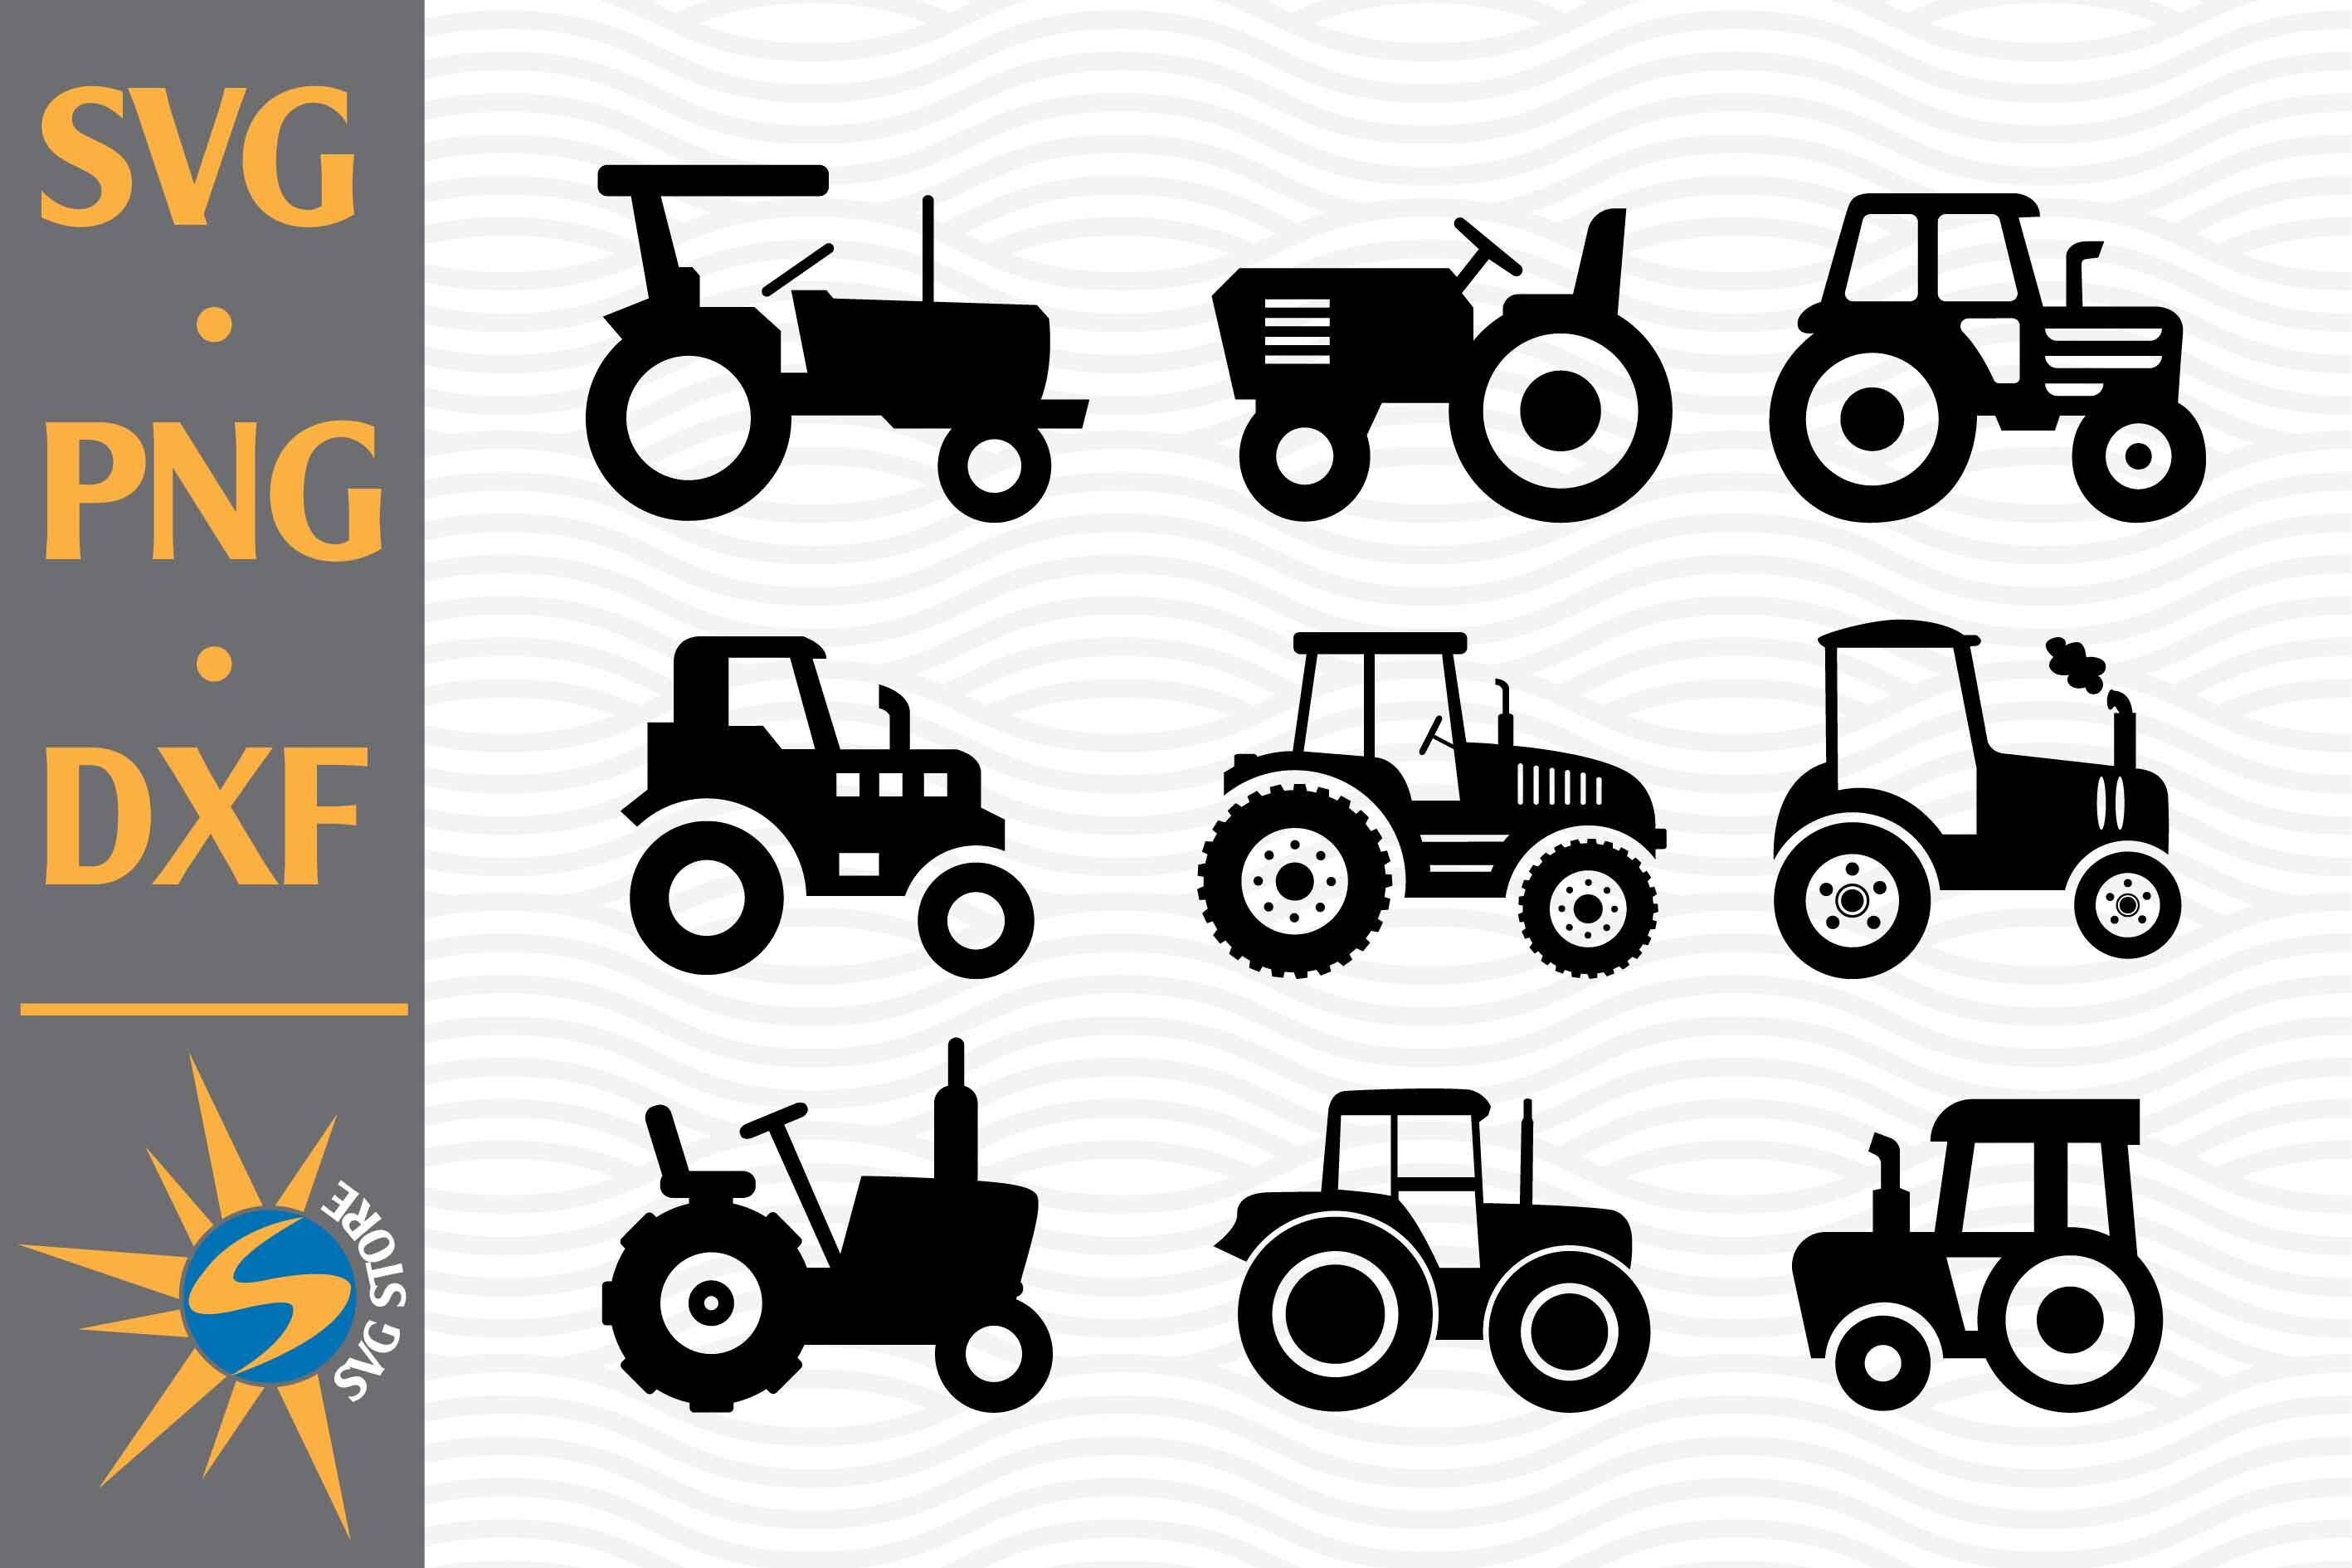 tractor silhouette png